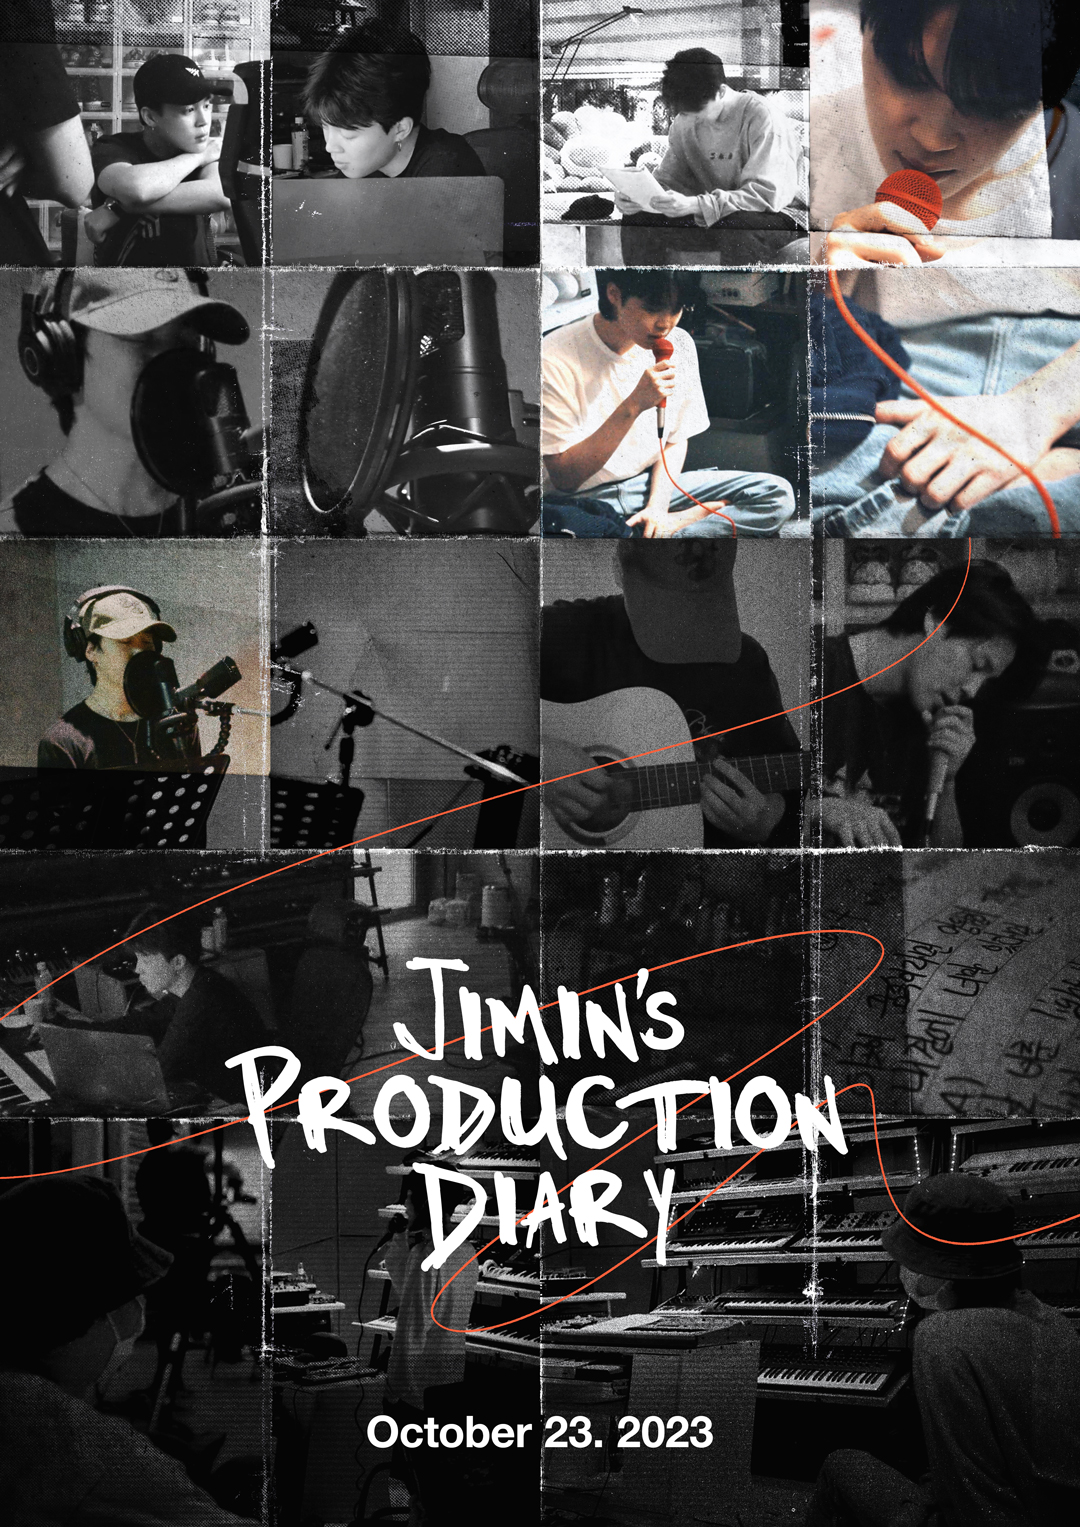 Jimin's Production Diary] Poster (Record ver.)